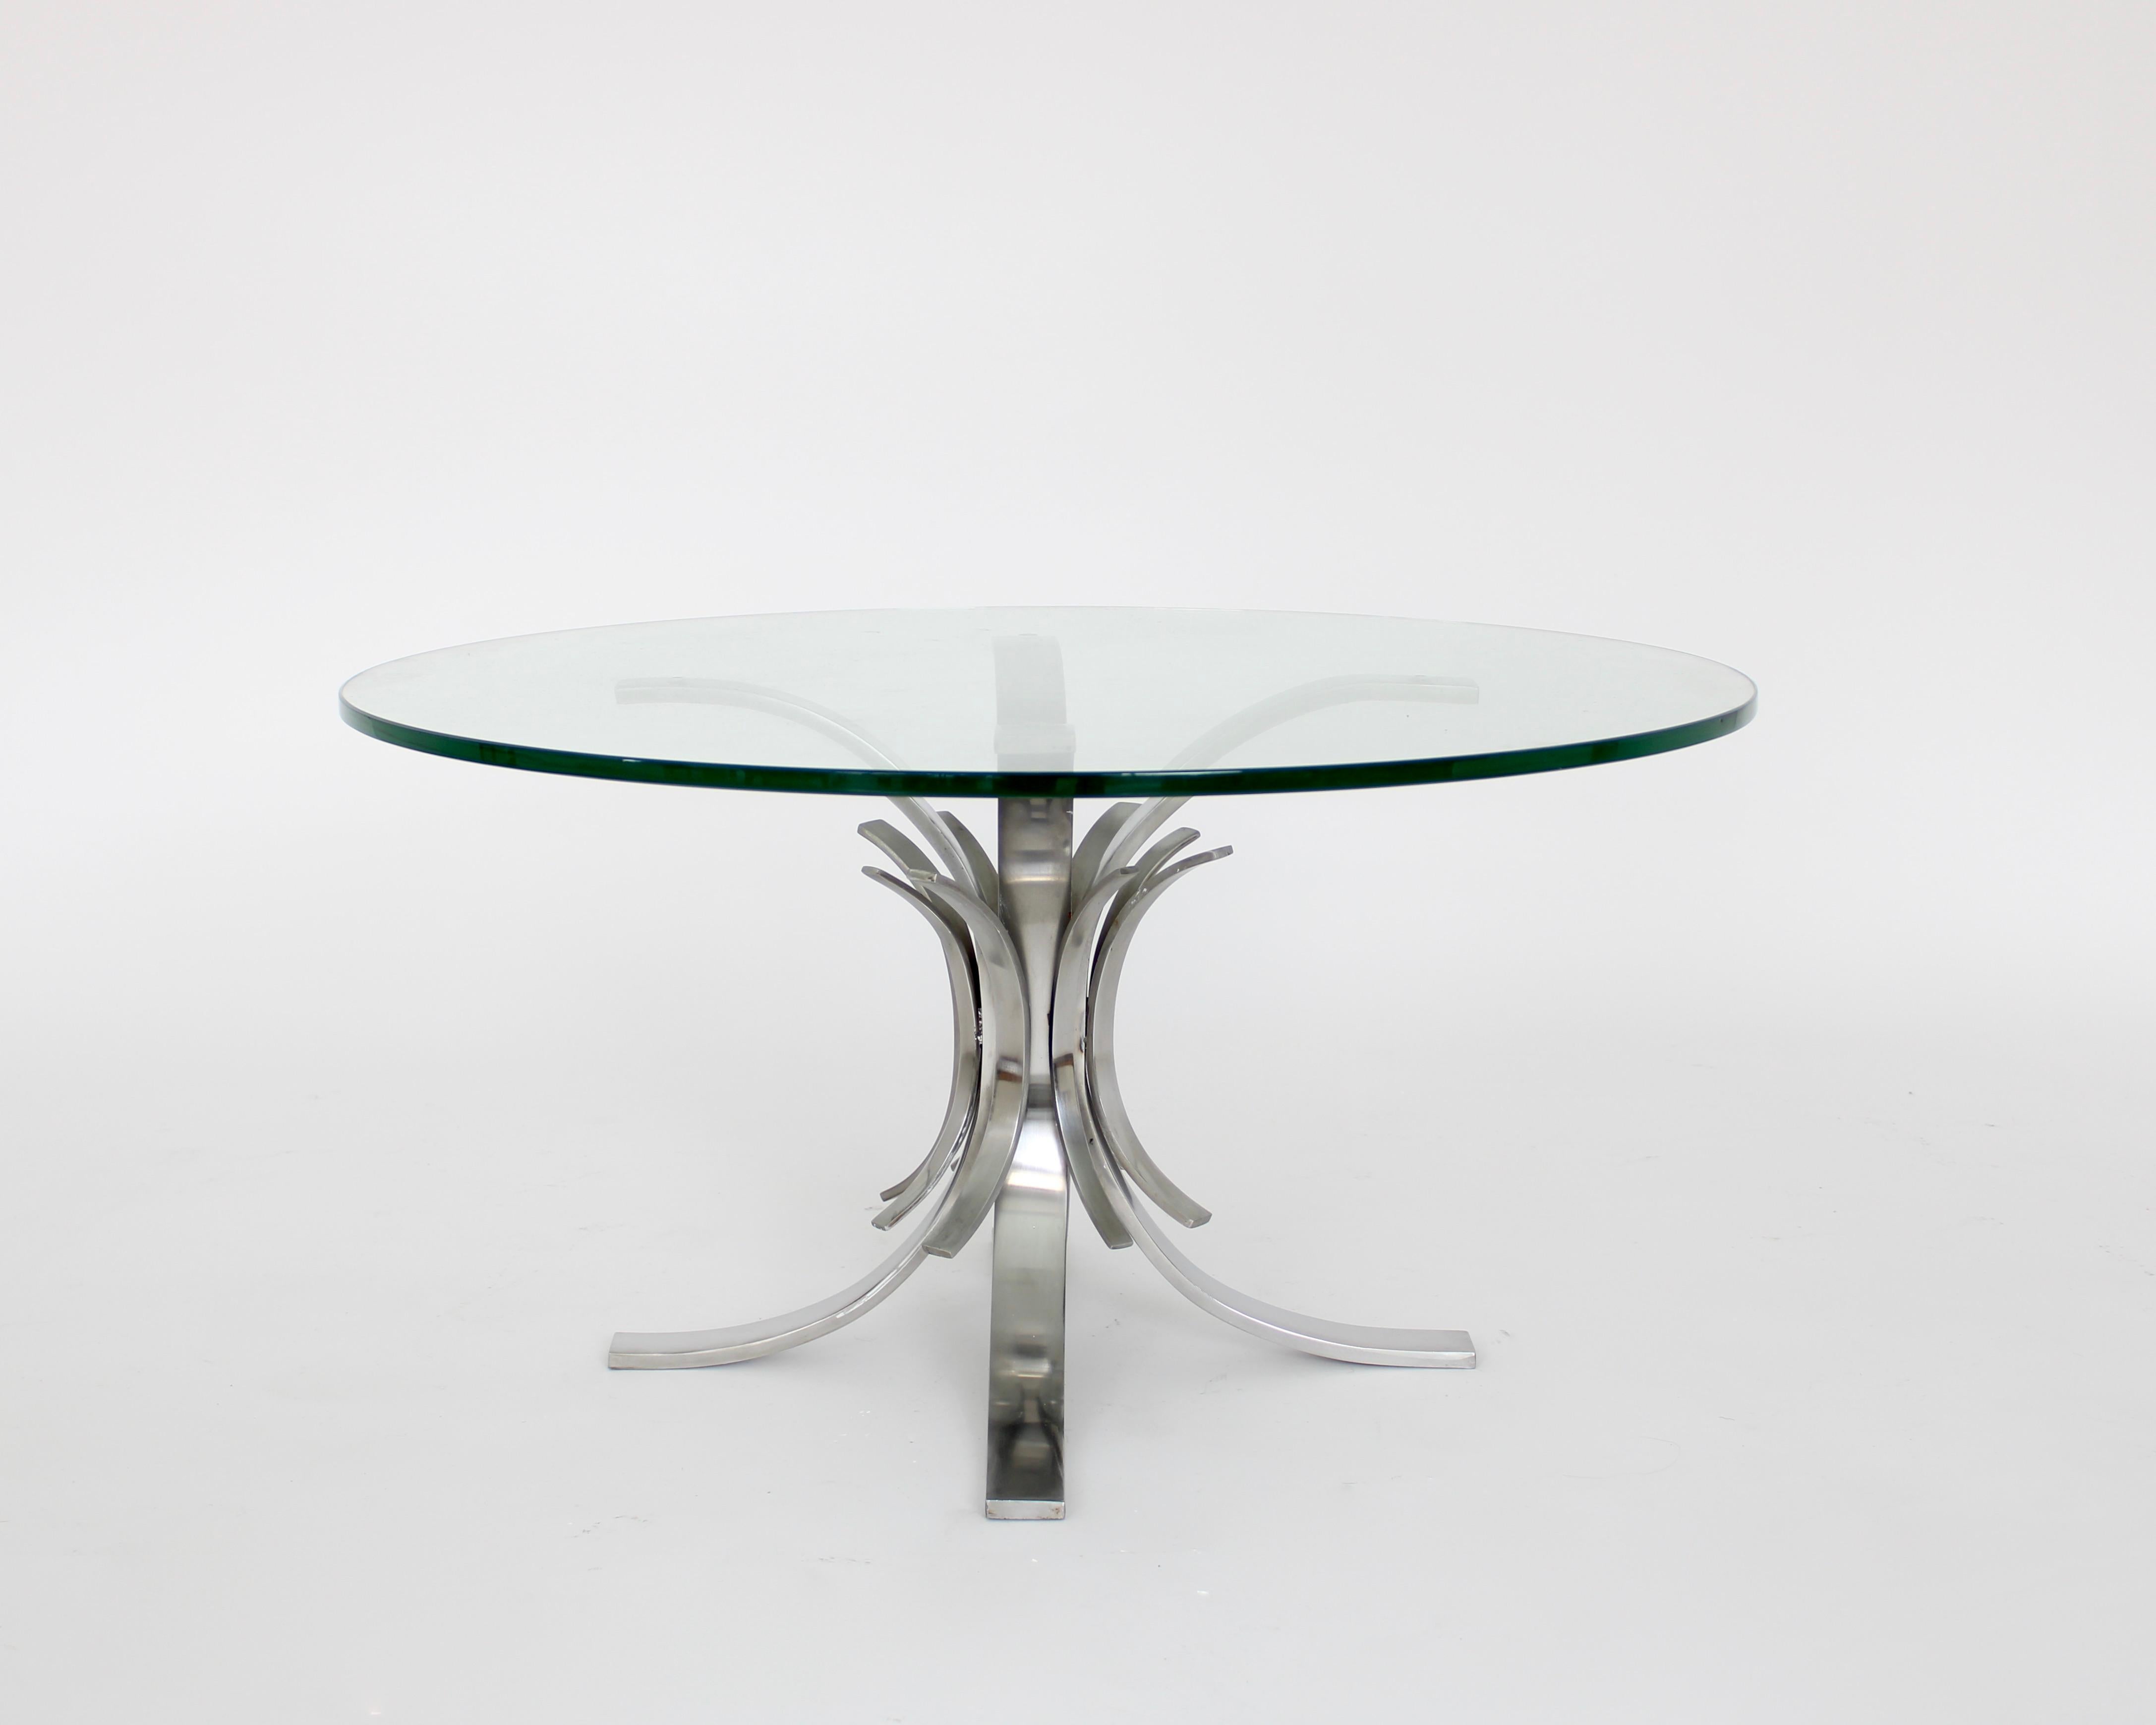 Stainless steel French coffee table attributed to Maria Pergay model Gerbe. 
Flaring pieces of curved stainless steel attached to a central core then support a round glass top. 
Although this exact model is not pictured in the monograph Maria